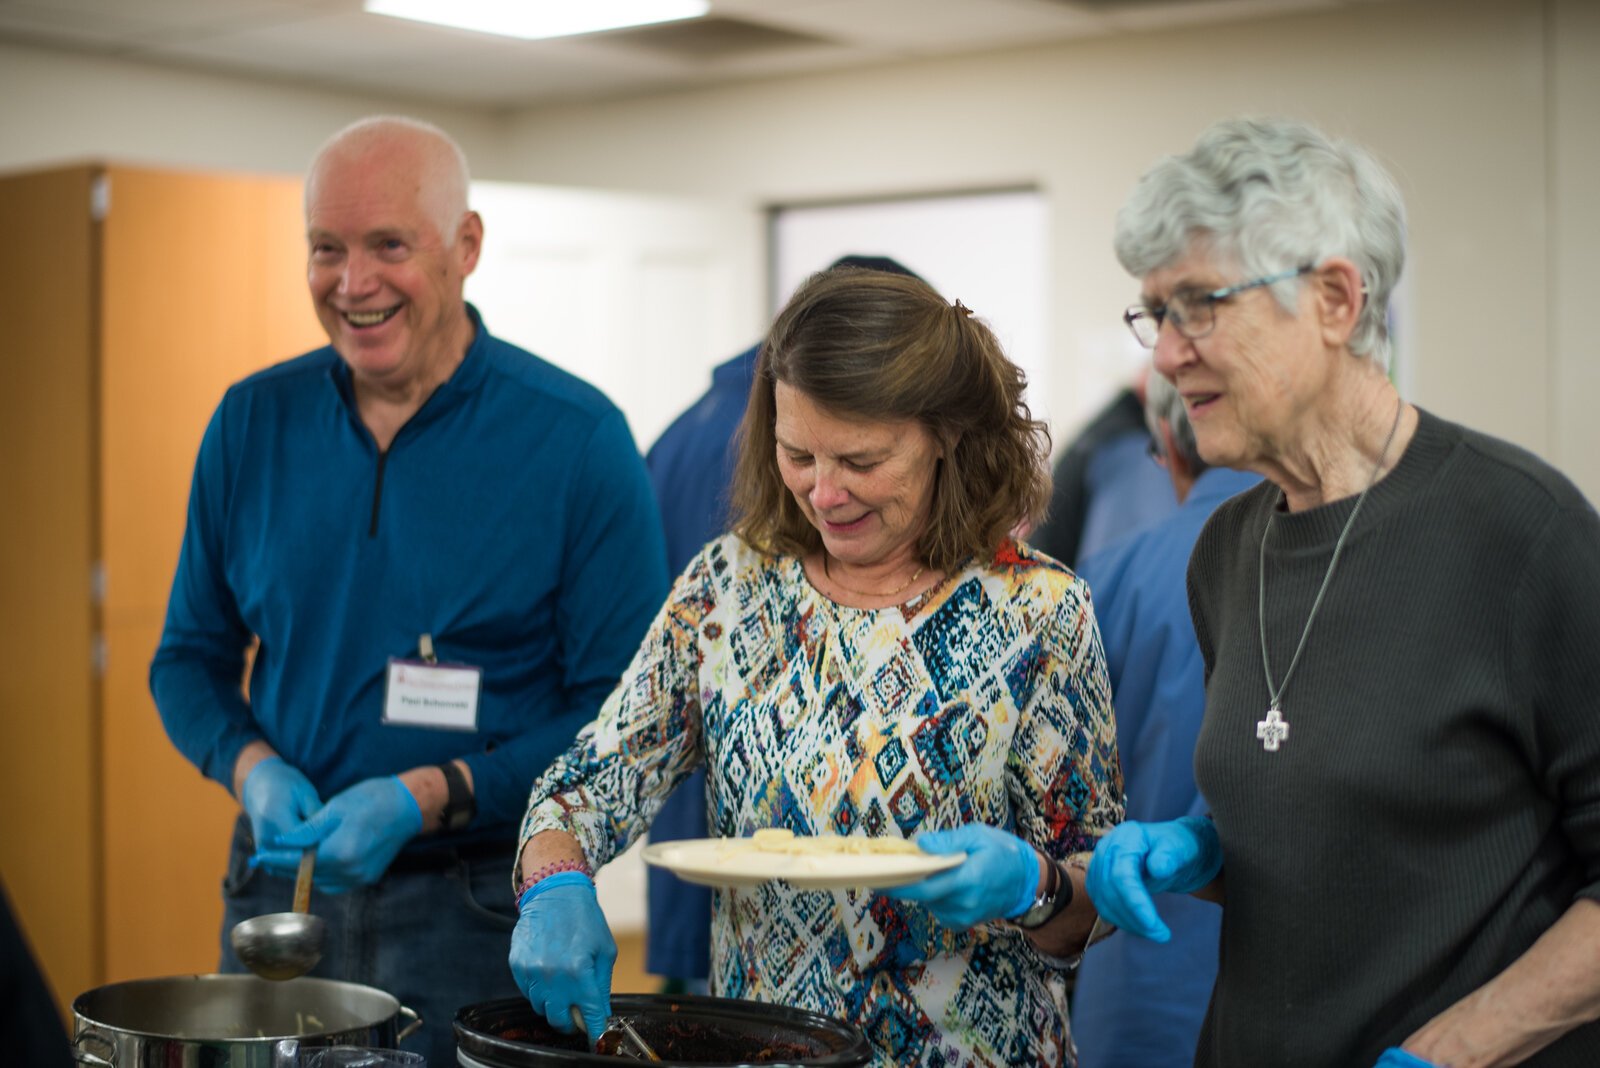 Church volunteers greet and feed diners at First Presbyterian's weekly Red Door dinners.